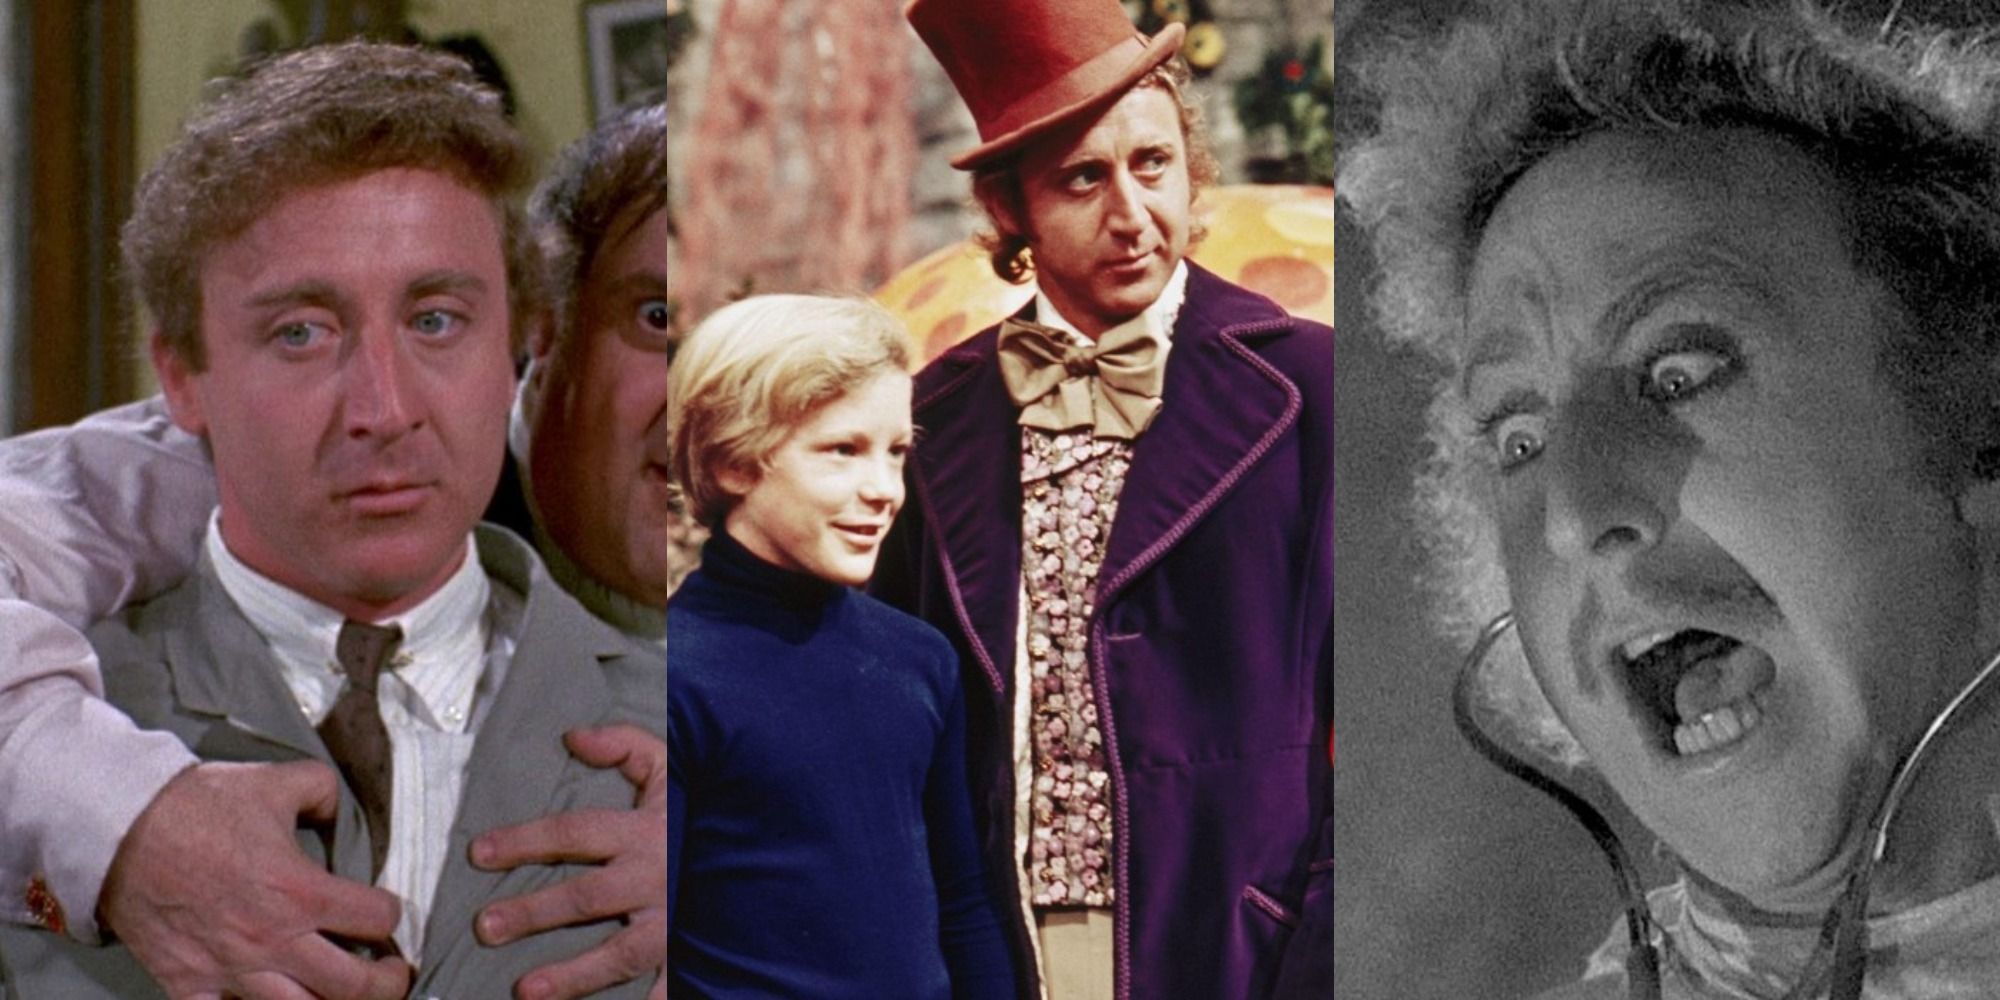 Gene Wilders 10 Best Movies According To IMDb RELATED 5 Reasons Johnny Depps Portrayal As Willy Wonka Was Best (& 5 Reasons Gene Wilders Was More Impressive)